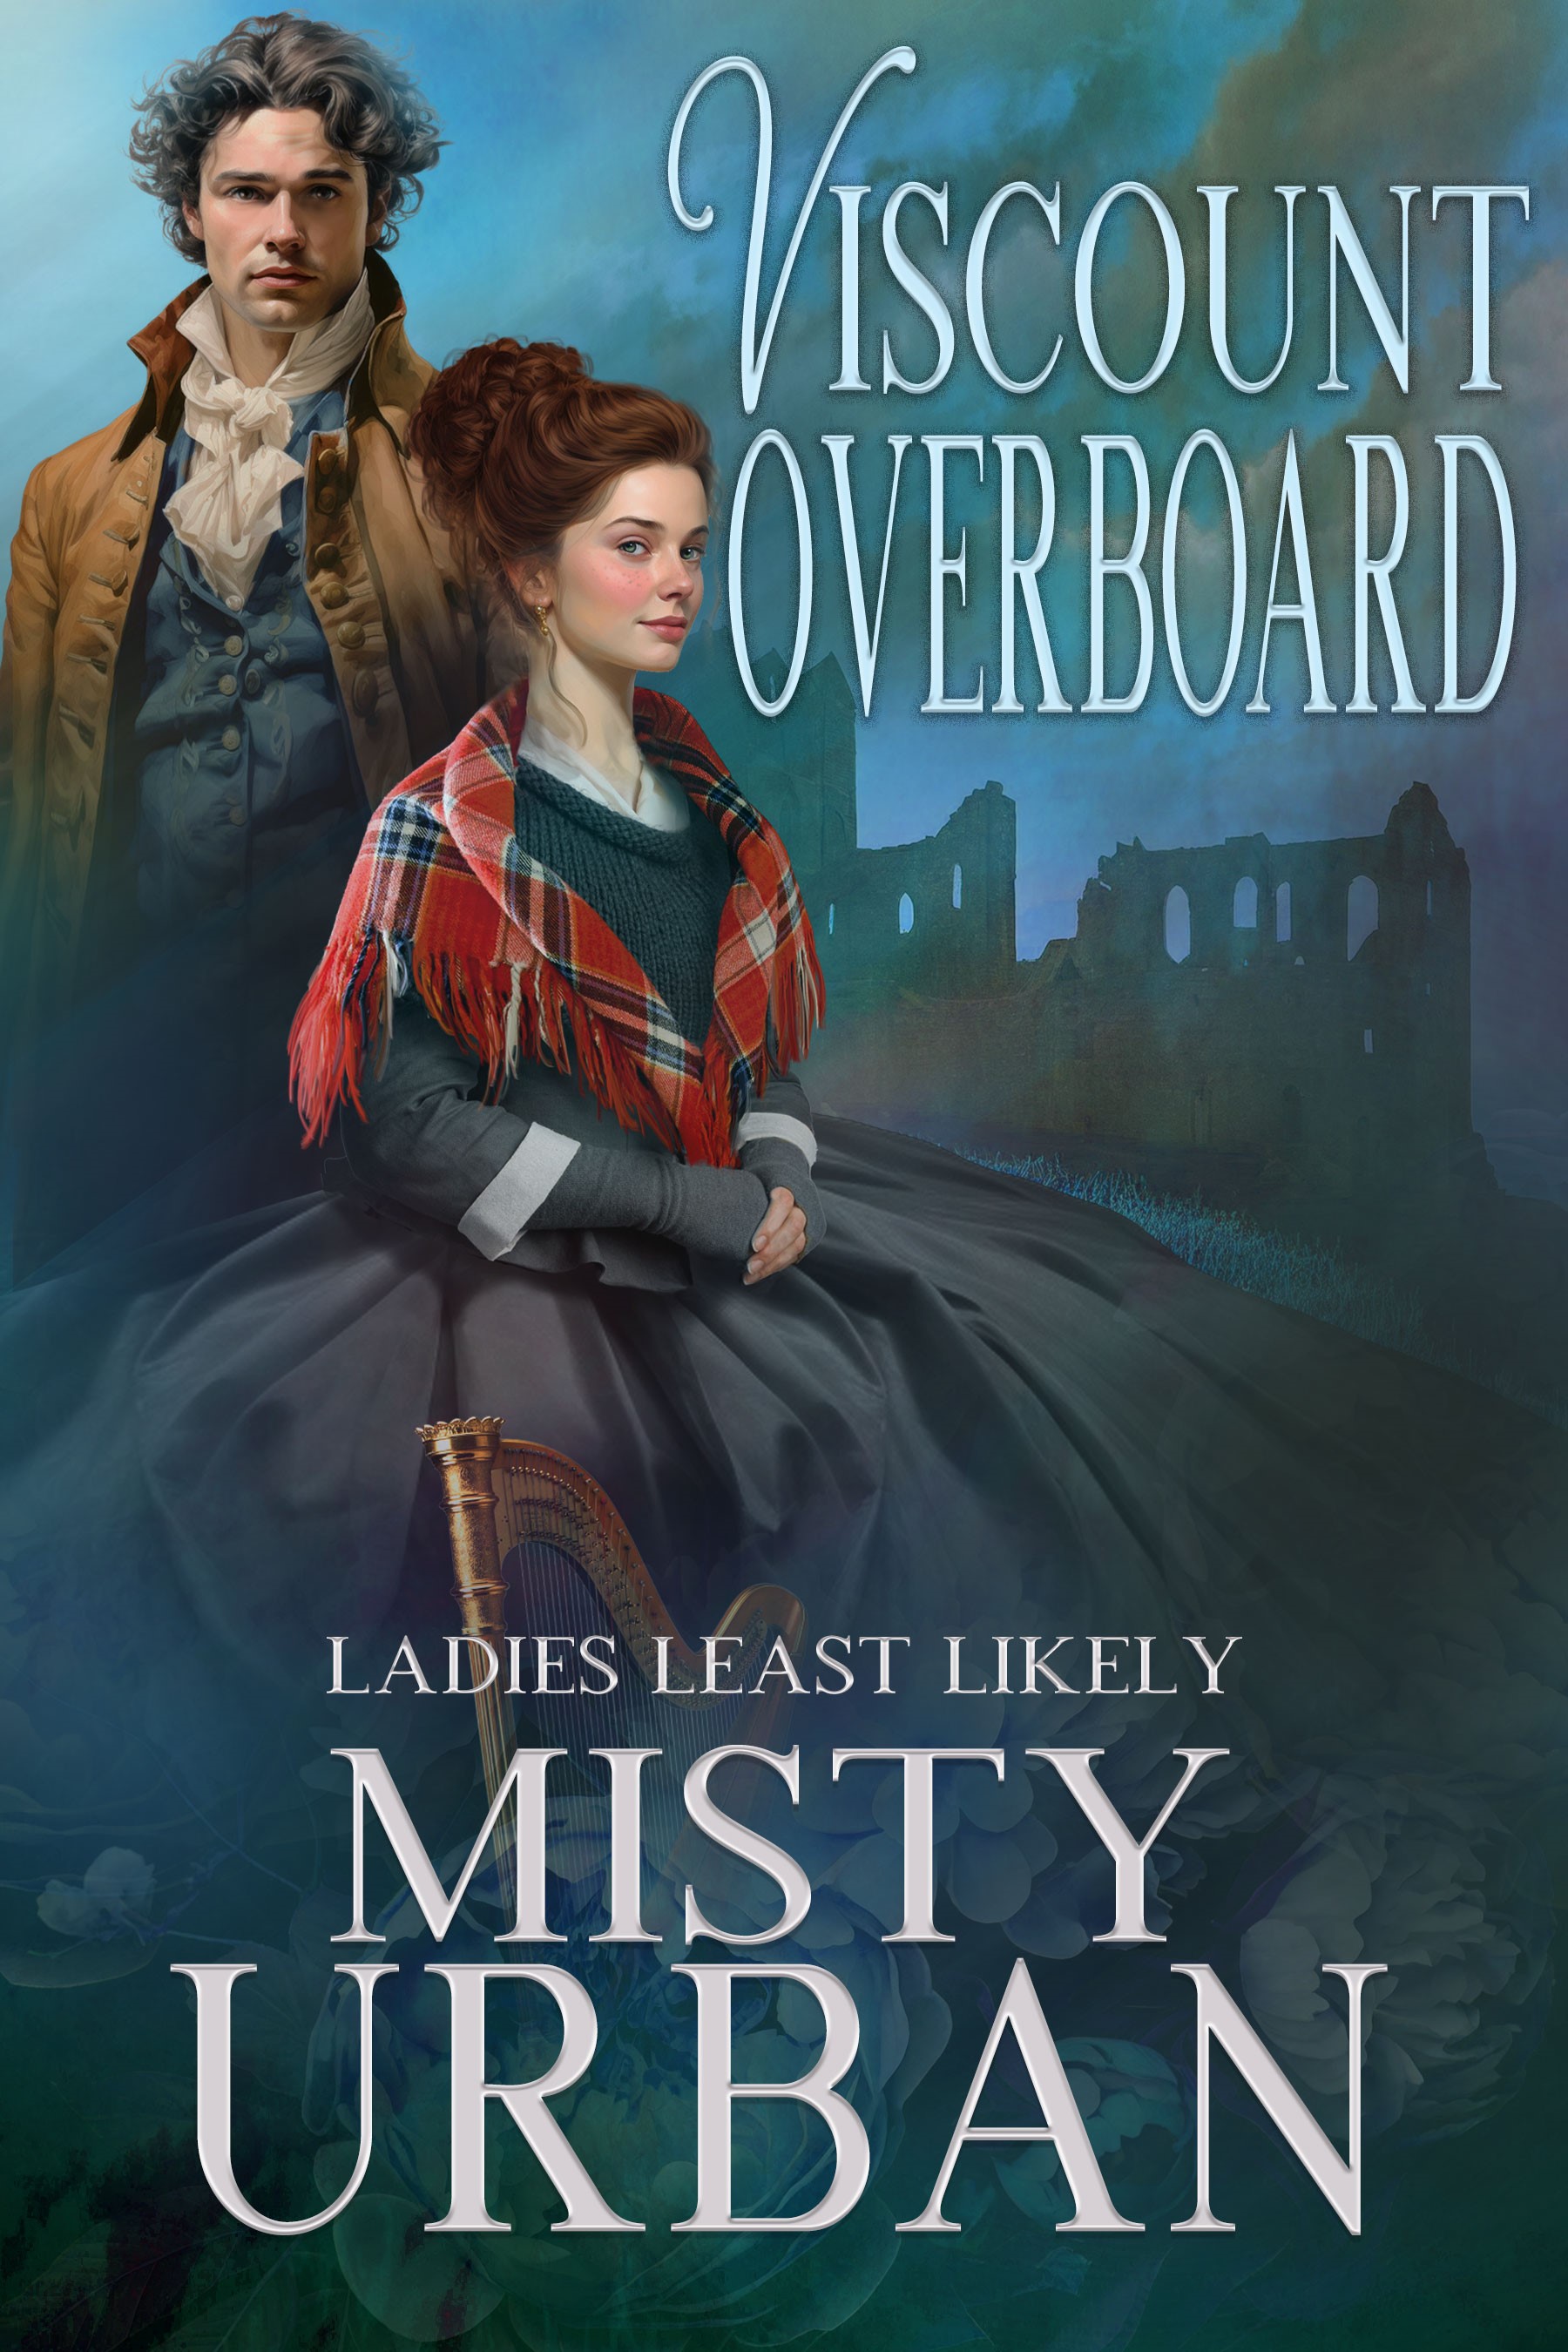 Cover image of viscount overboard, a historical romance